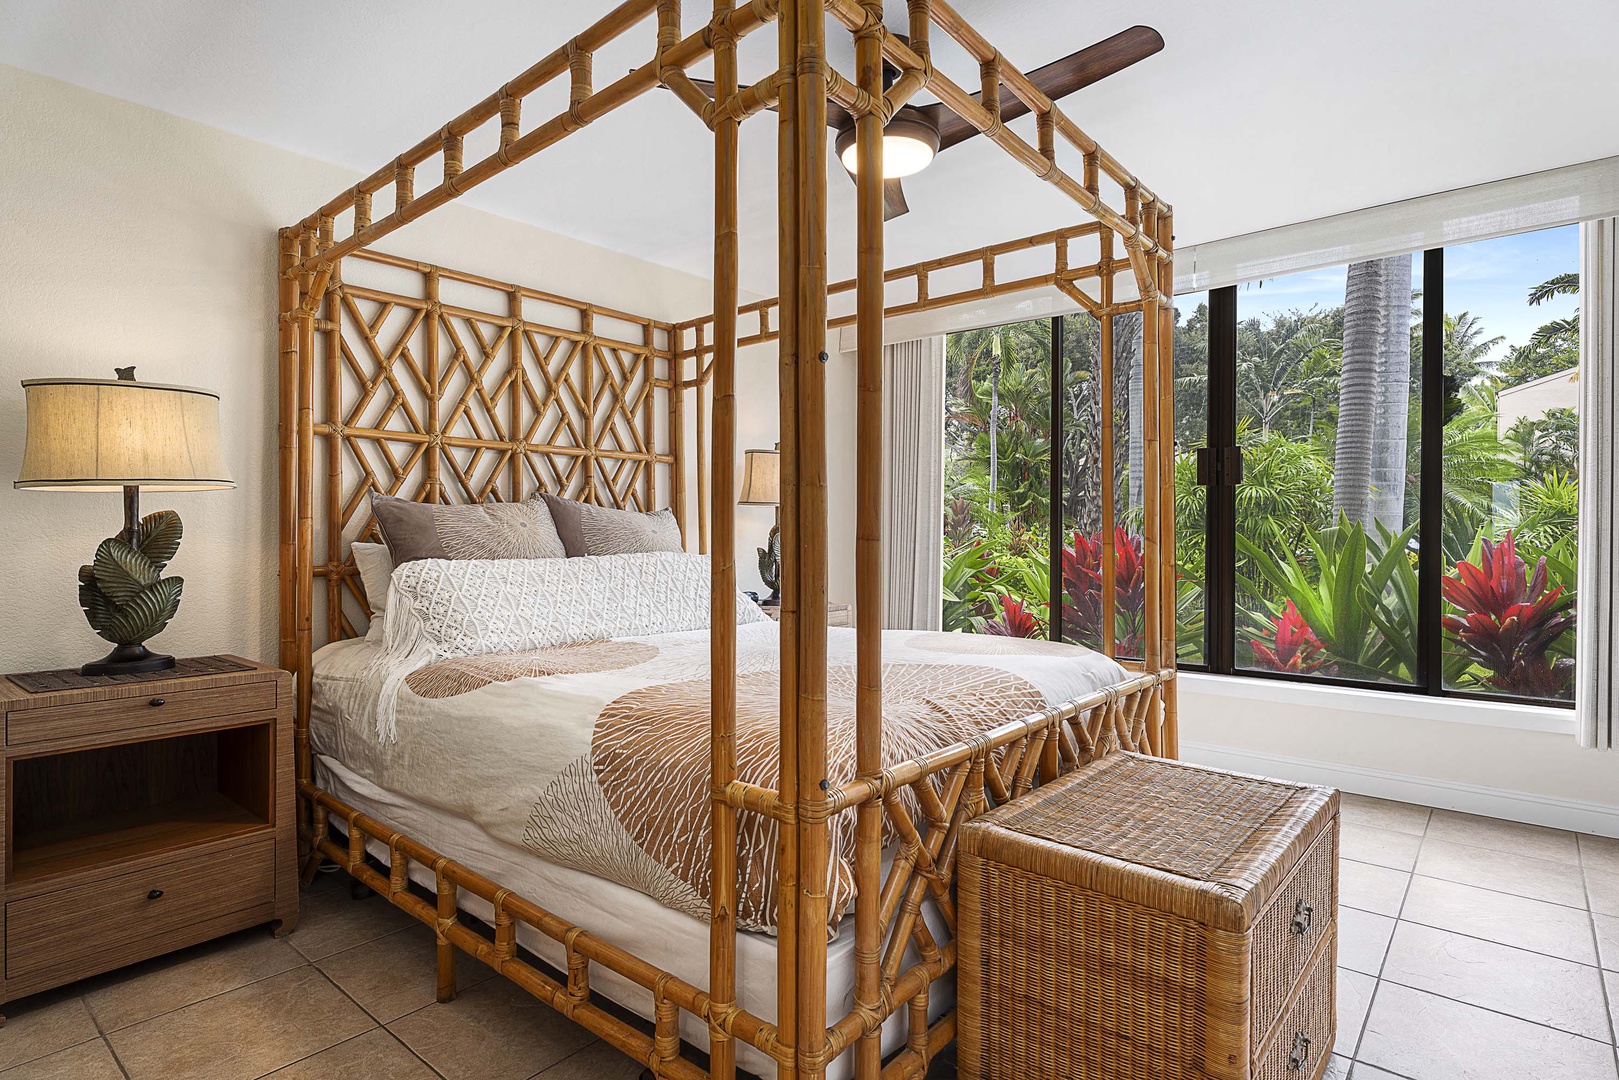 Kailua Kona Vacation Rentals, Keauhou Kona Surf & Racquet 2101 - The guest bedroom’s bamboo four poster Queen-size bed is perfectly complemented by the garden views visible just outside the room’s large window.